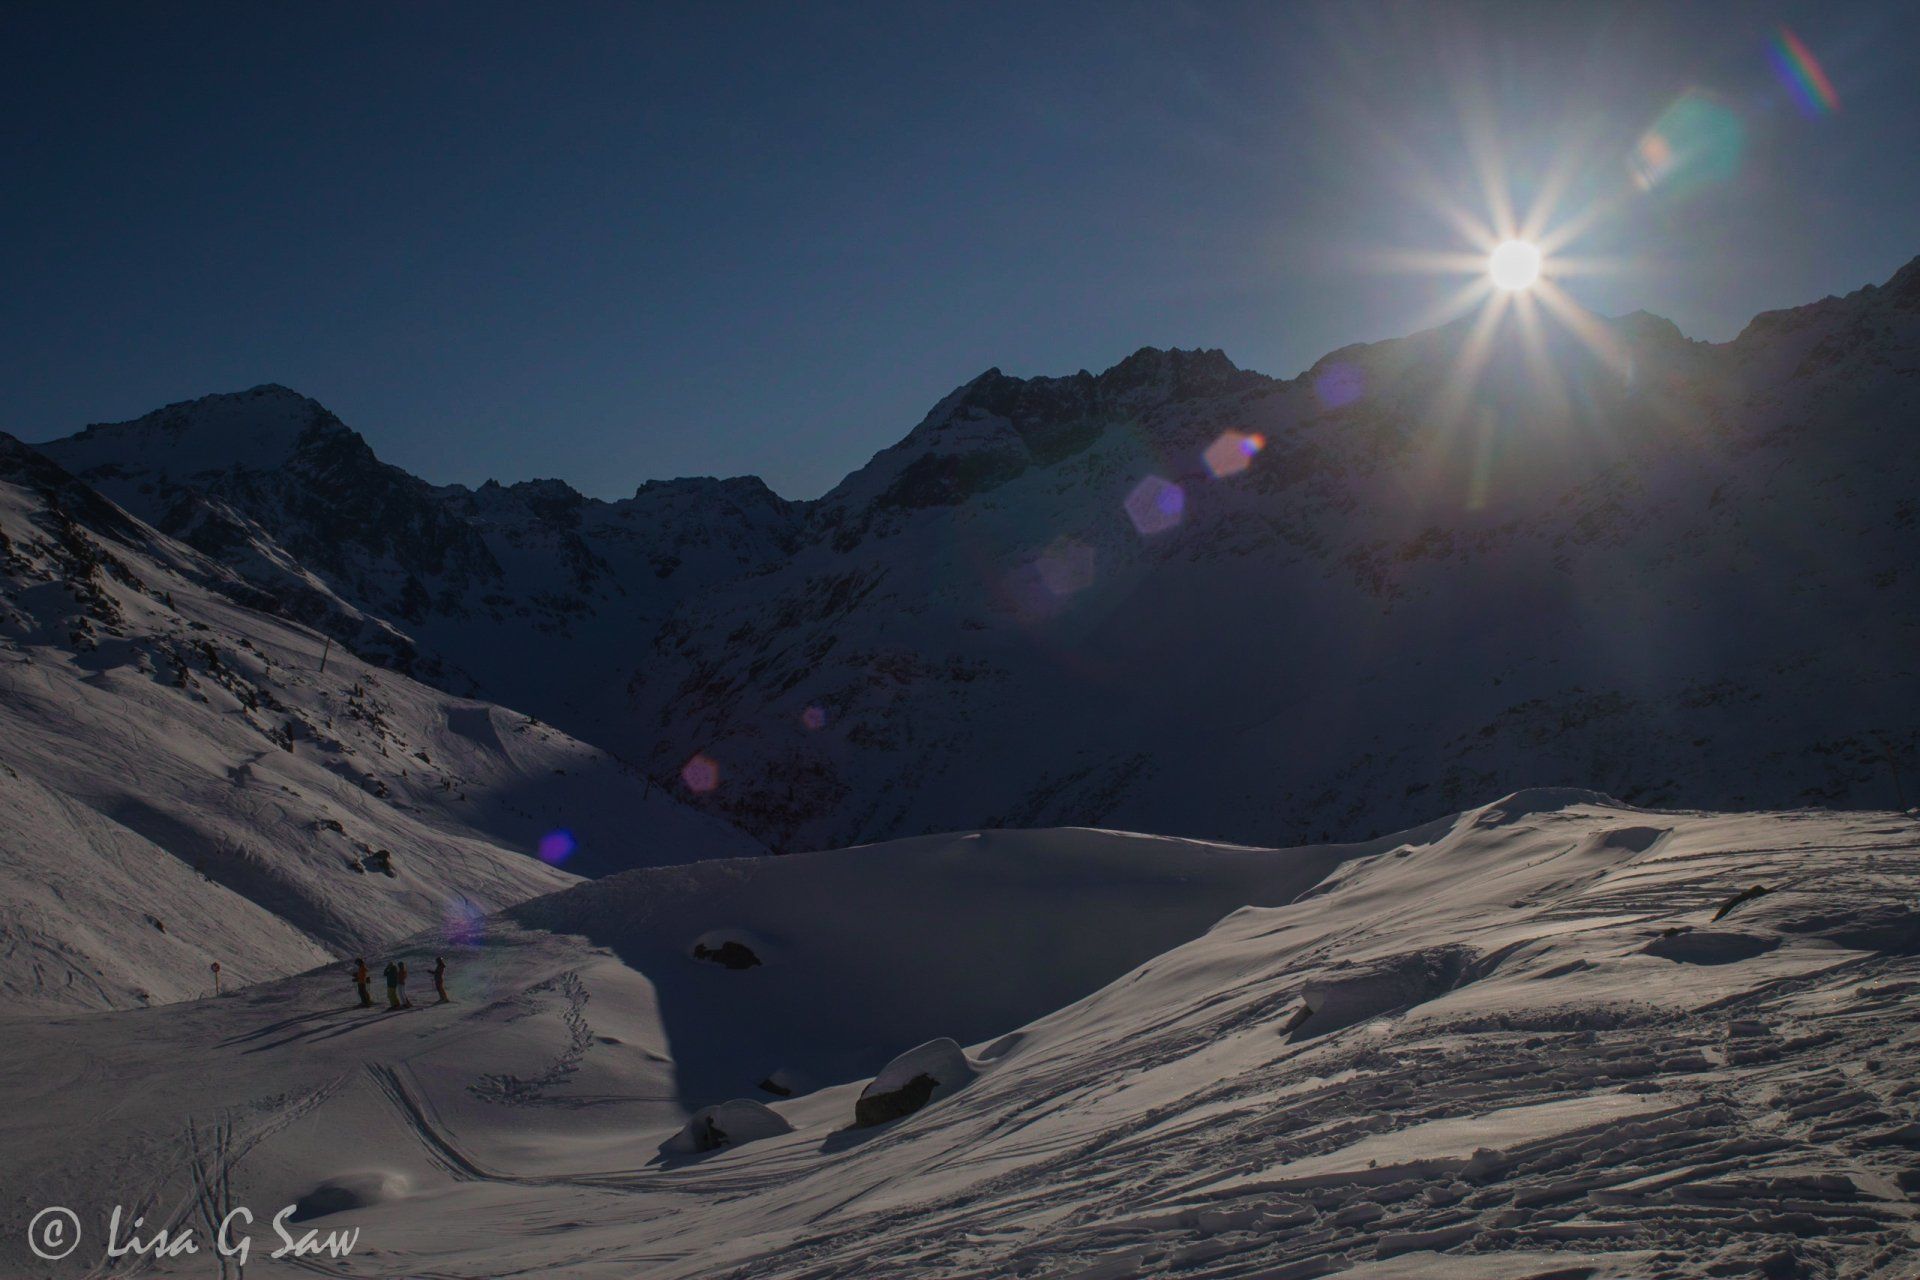 Sunburst behind snow capped mountains with skiers on piste